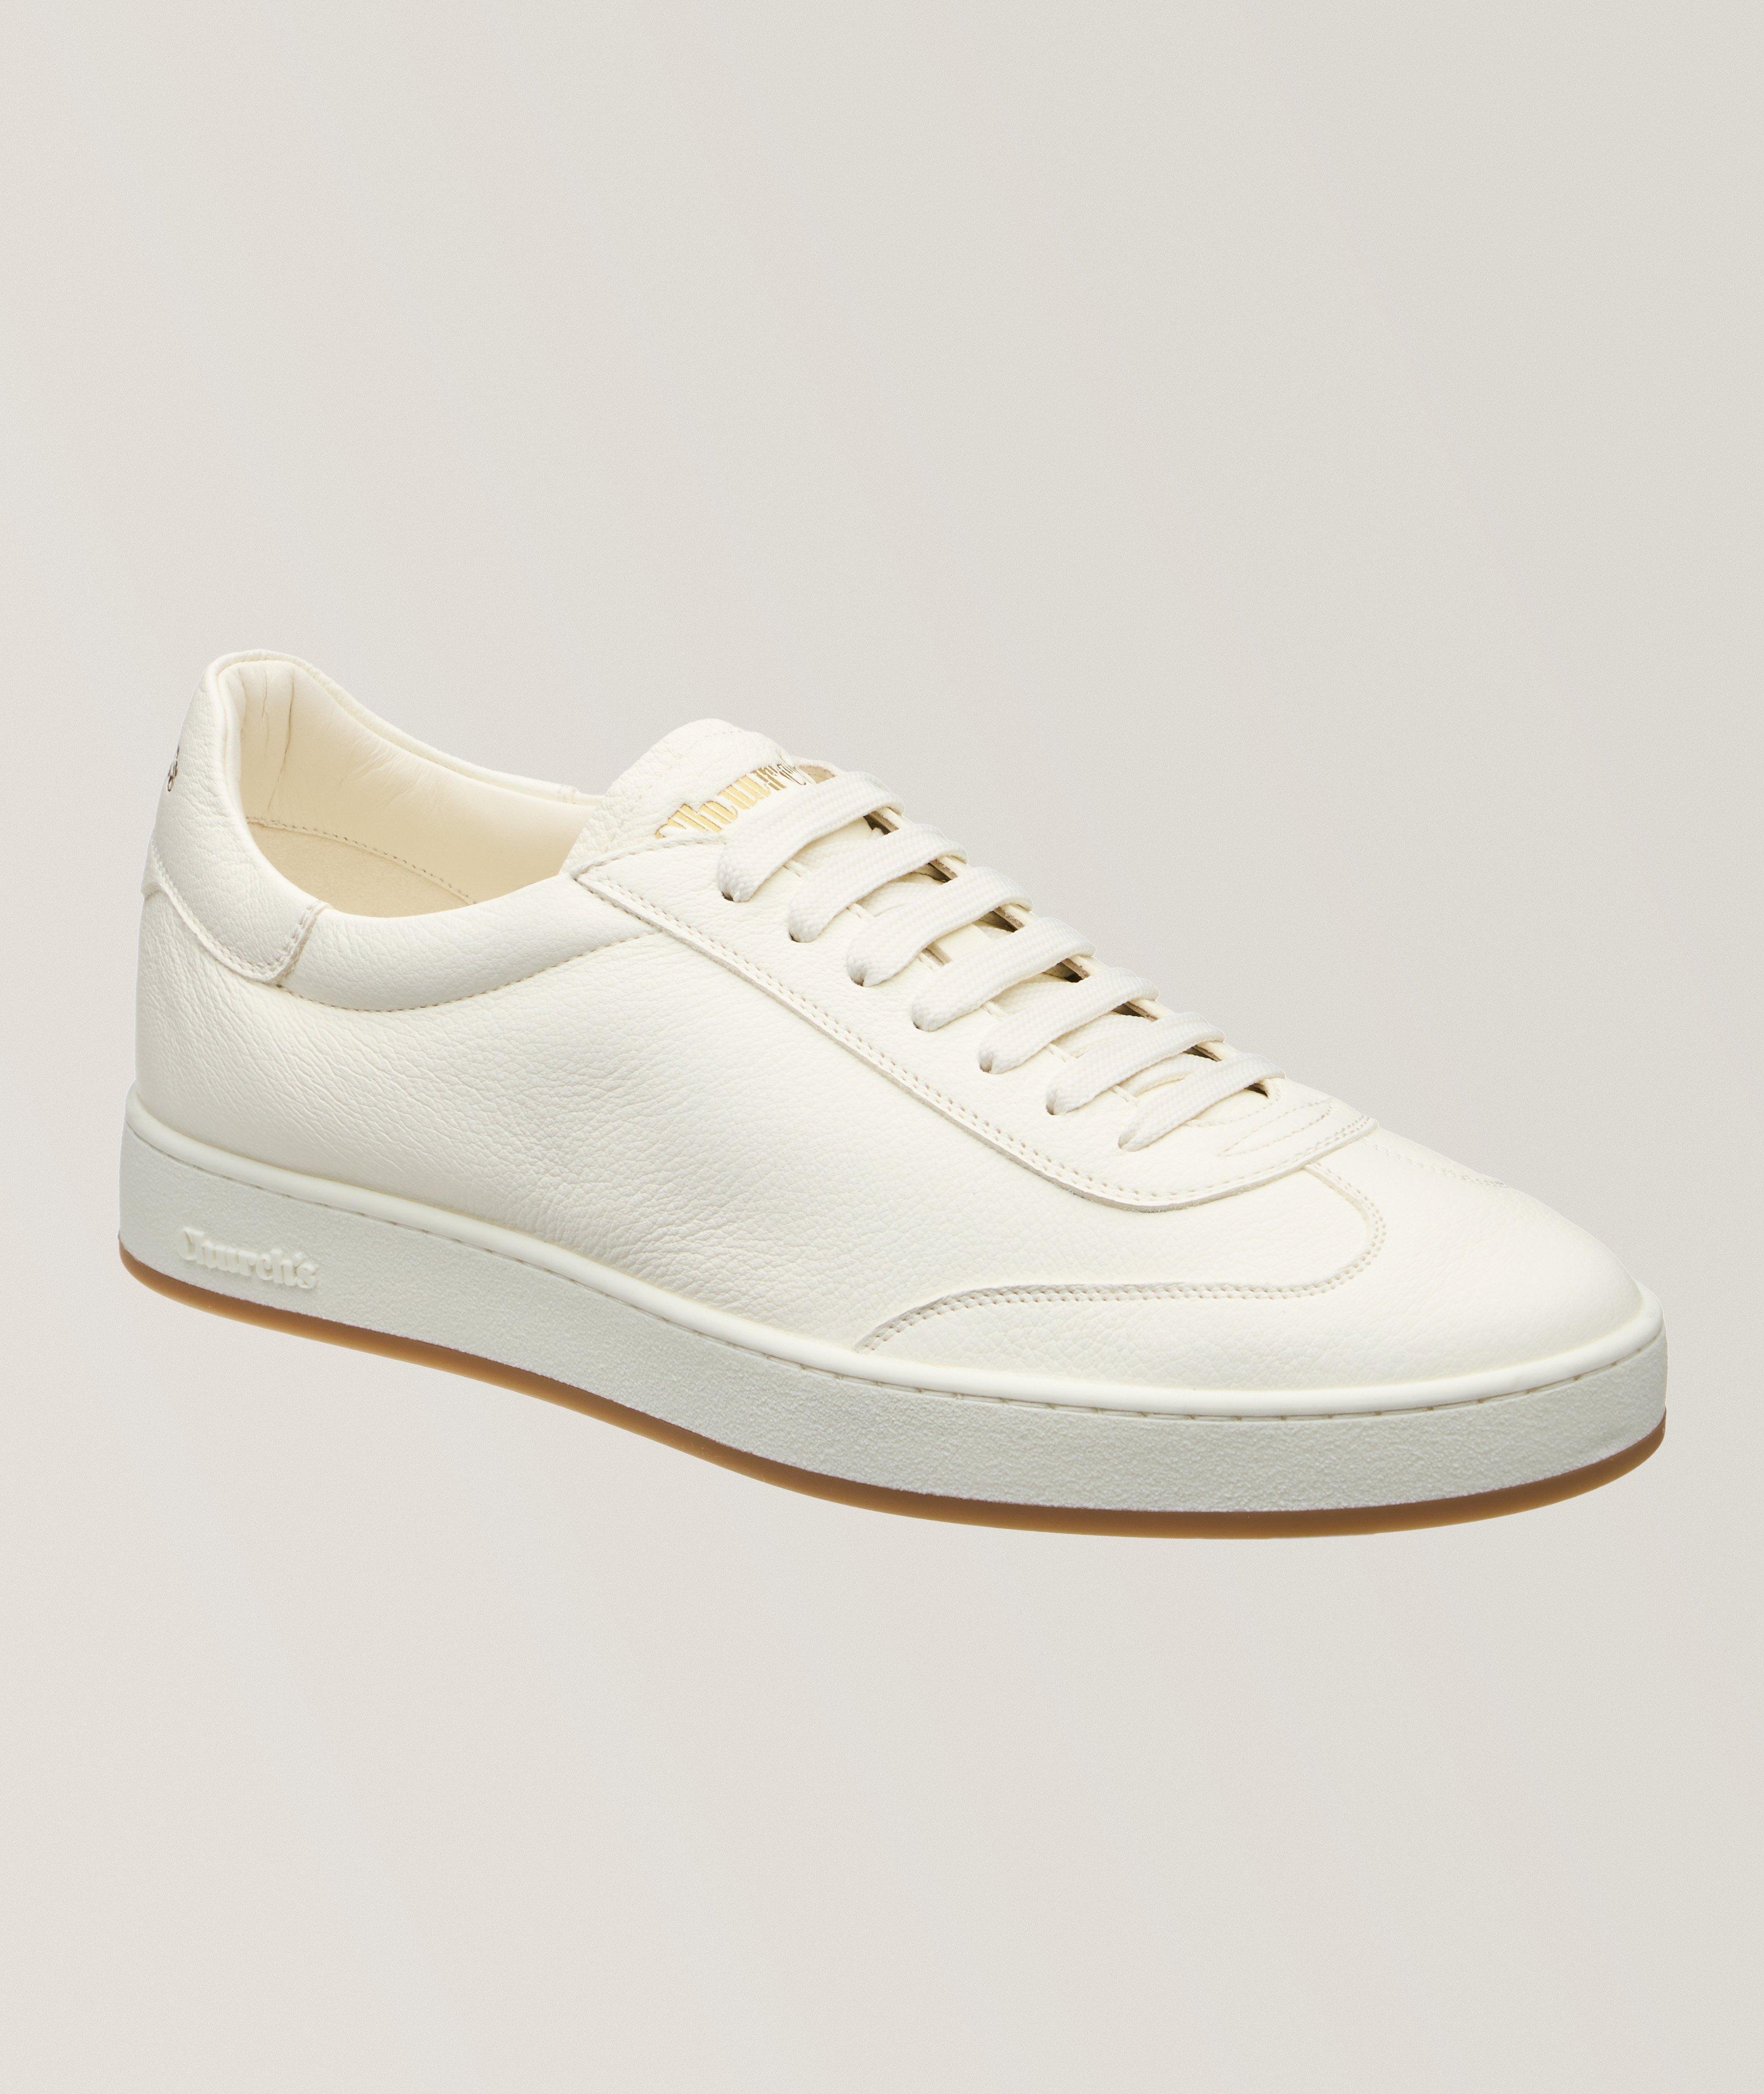 Largs 2 Leather Sneakers image 0